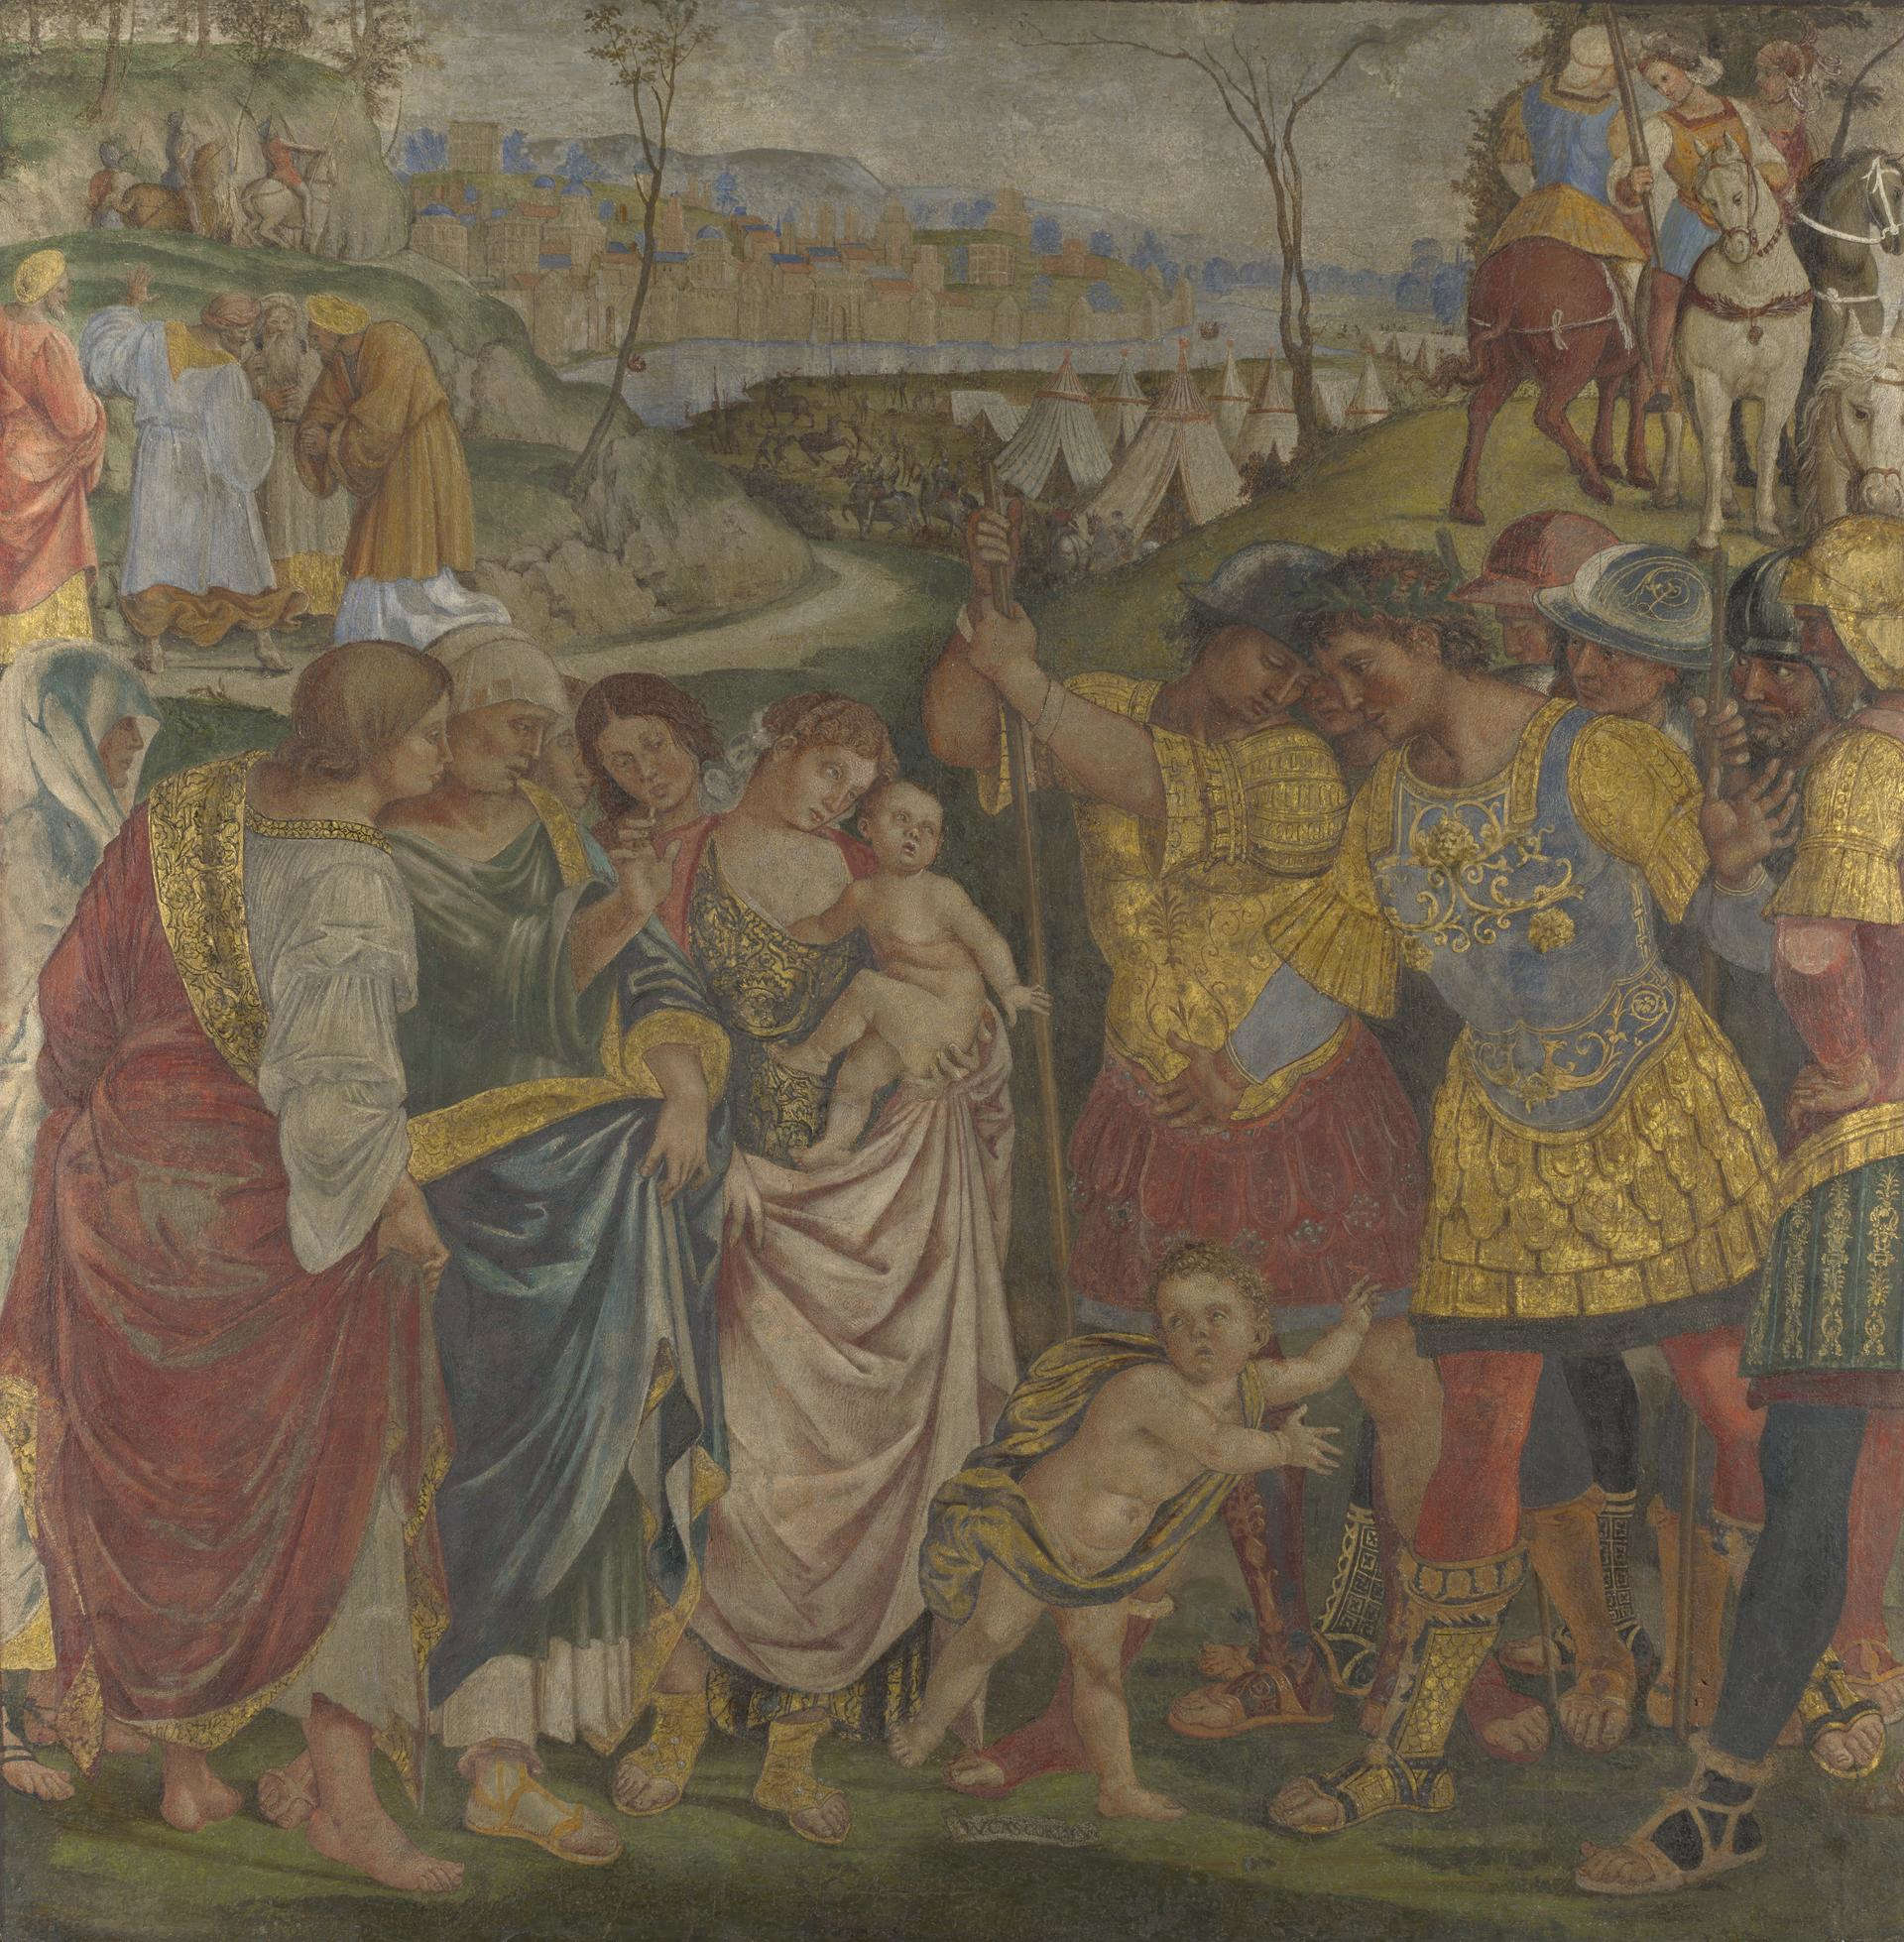 Luca Signorelli, Coriolanus Is Persuaded by His Family to Spare Rome (c. 1509; fresco transported on canvas, 125.7 x 125.7 cm; London, National Gallery)